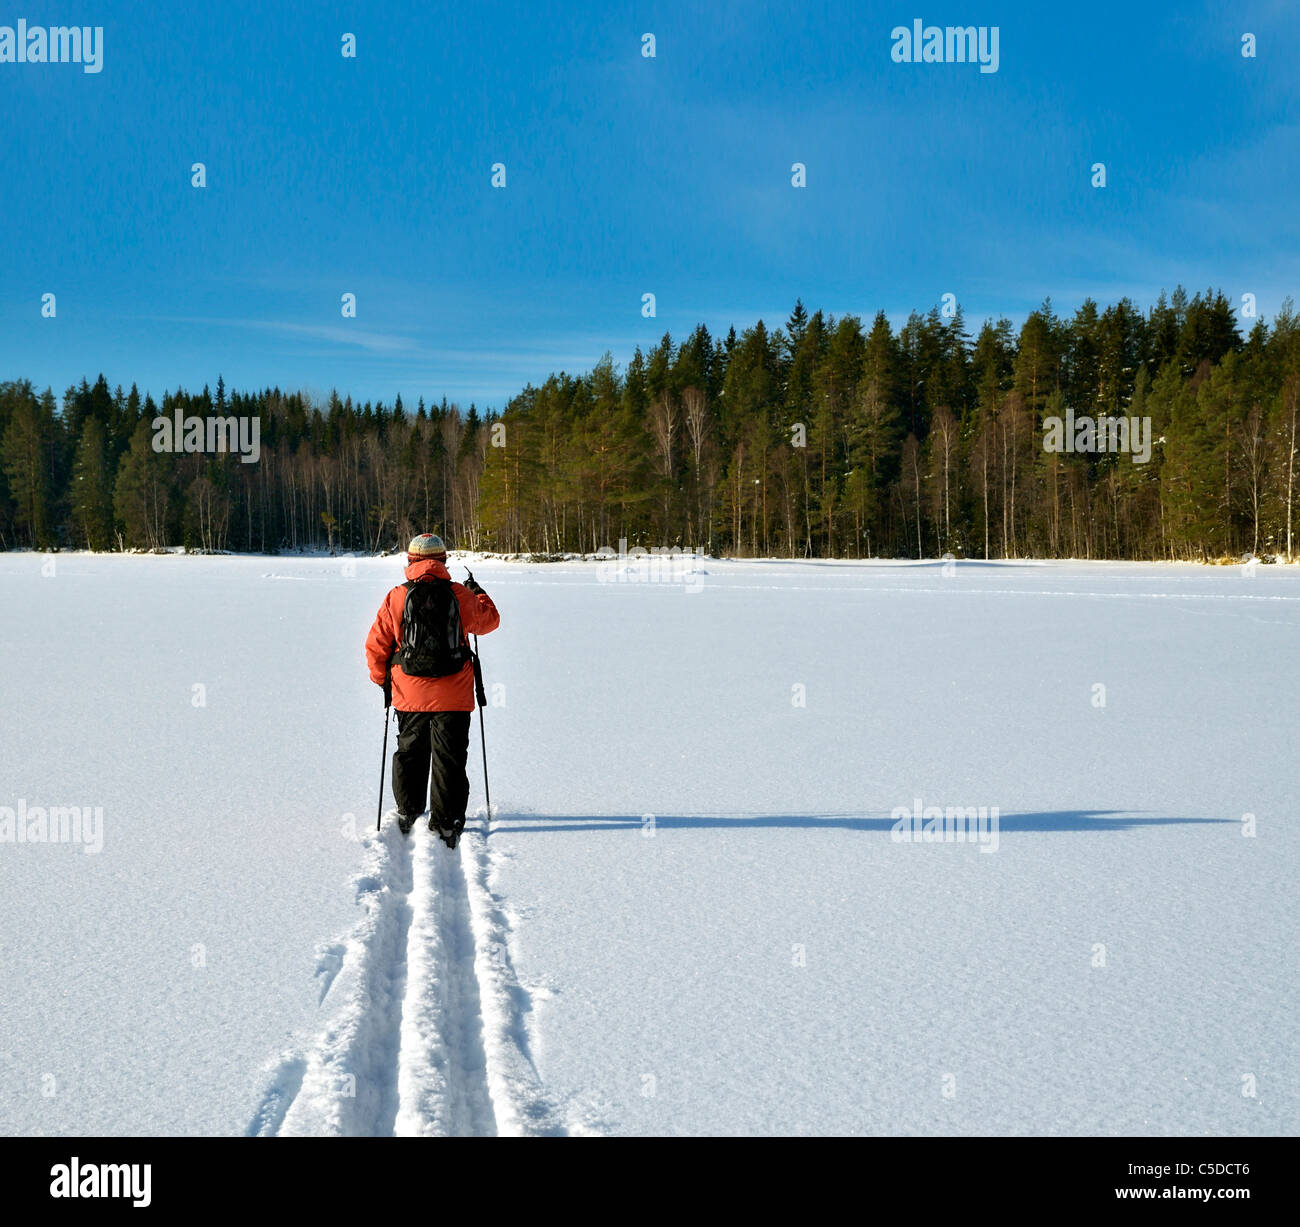 Rear view of a man skiing on the lake snow ice against trees and blue sky Stock Photo